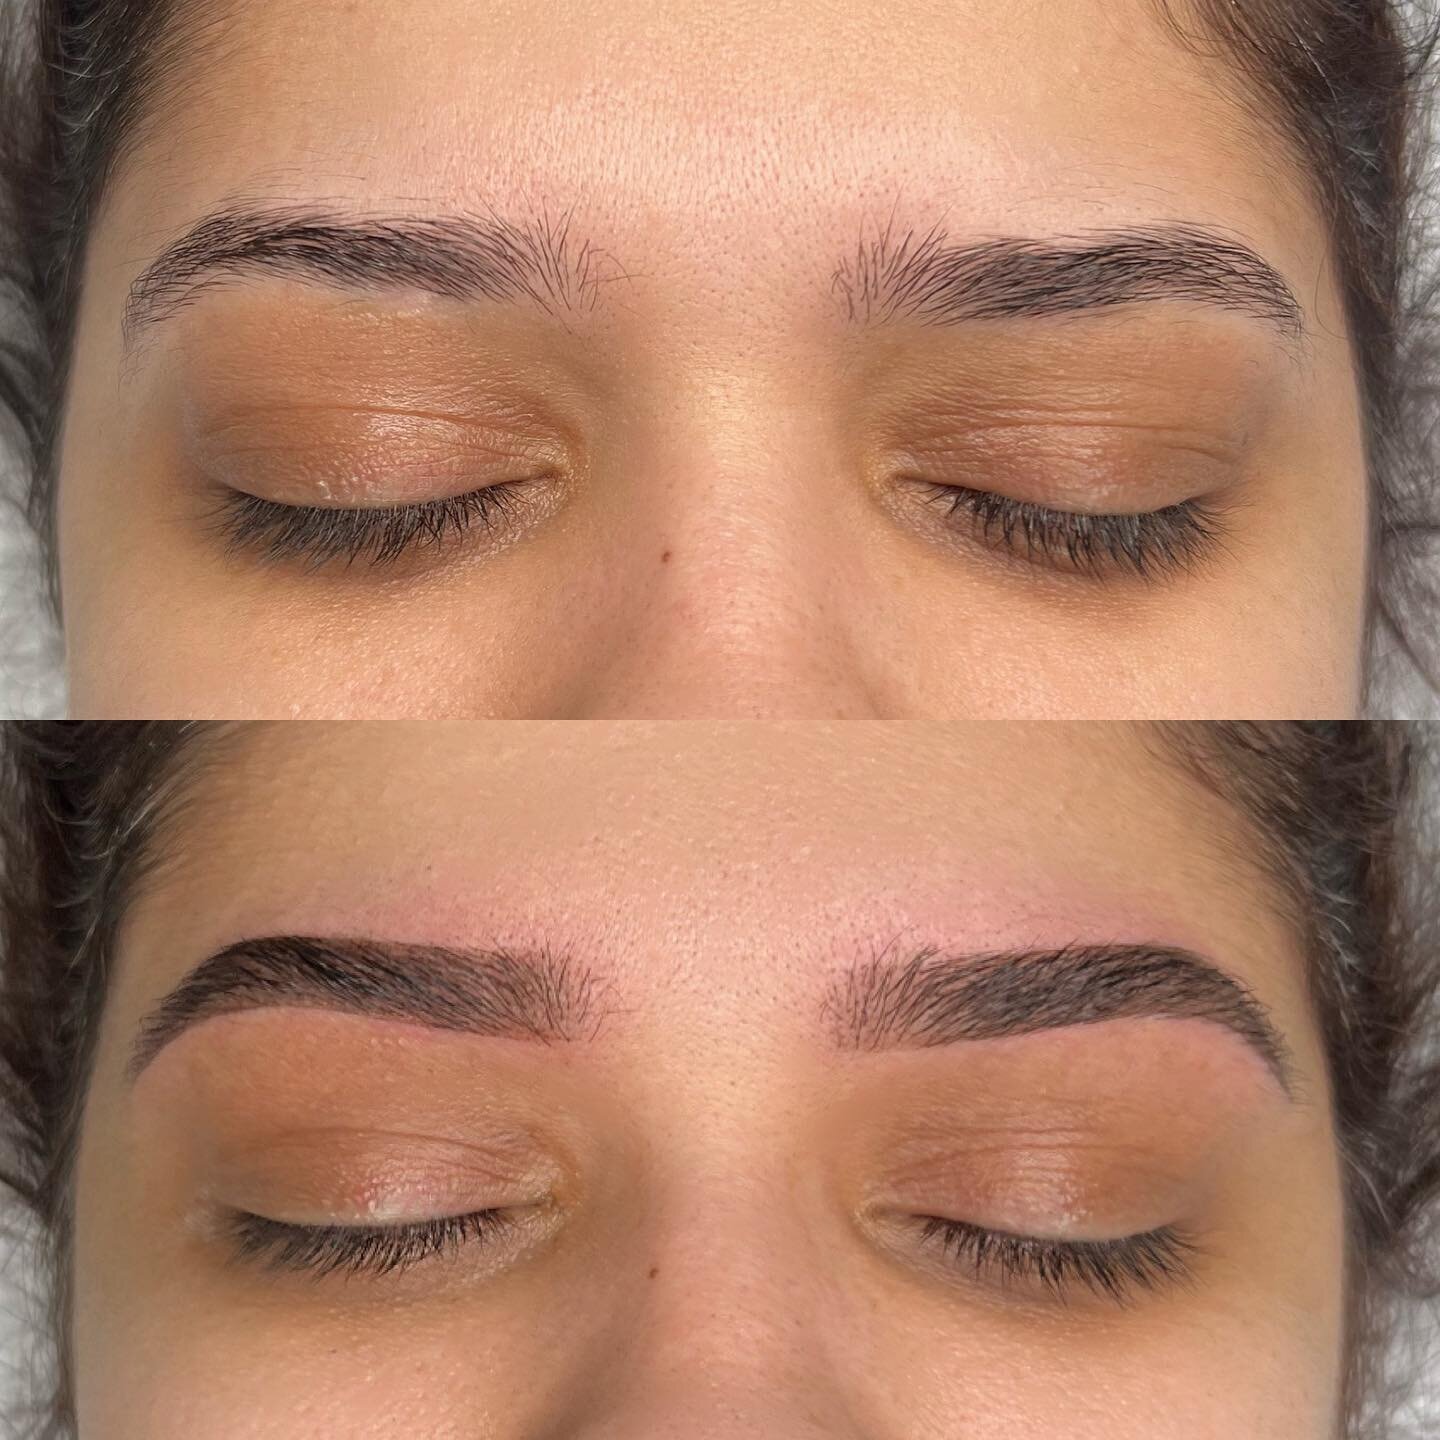 Giving thick brows the love they need with Ombre powder 🙌🏻😍

#lashextensions #lashextensionstoronto
#lashextensionsrichmondhill #lashextensionsmarkham
#ombrepowder #eyelinertattoo
#scalpmicropigmentation #microneedling
#vaughanmicroneedling #pmu #